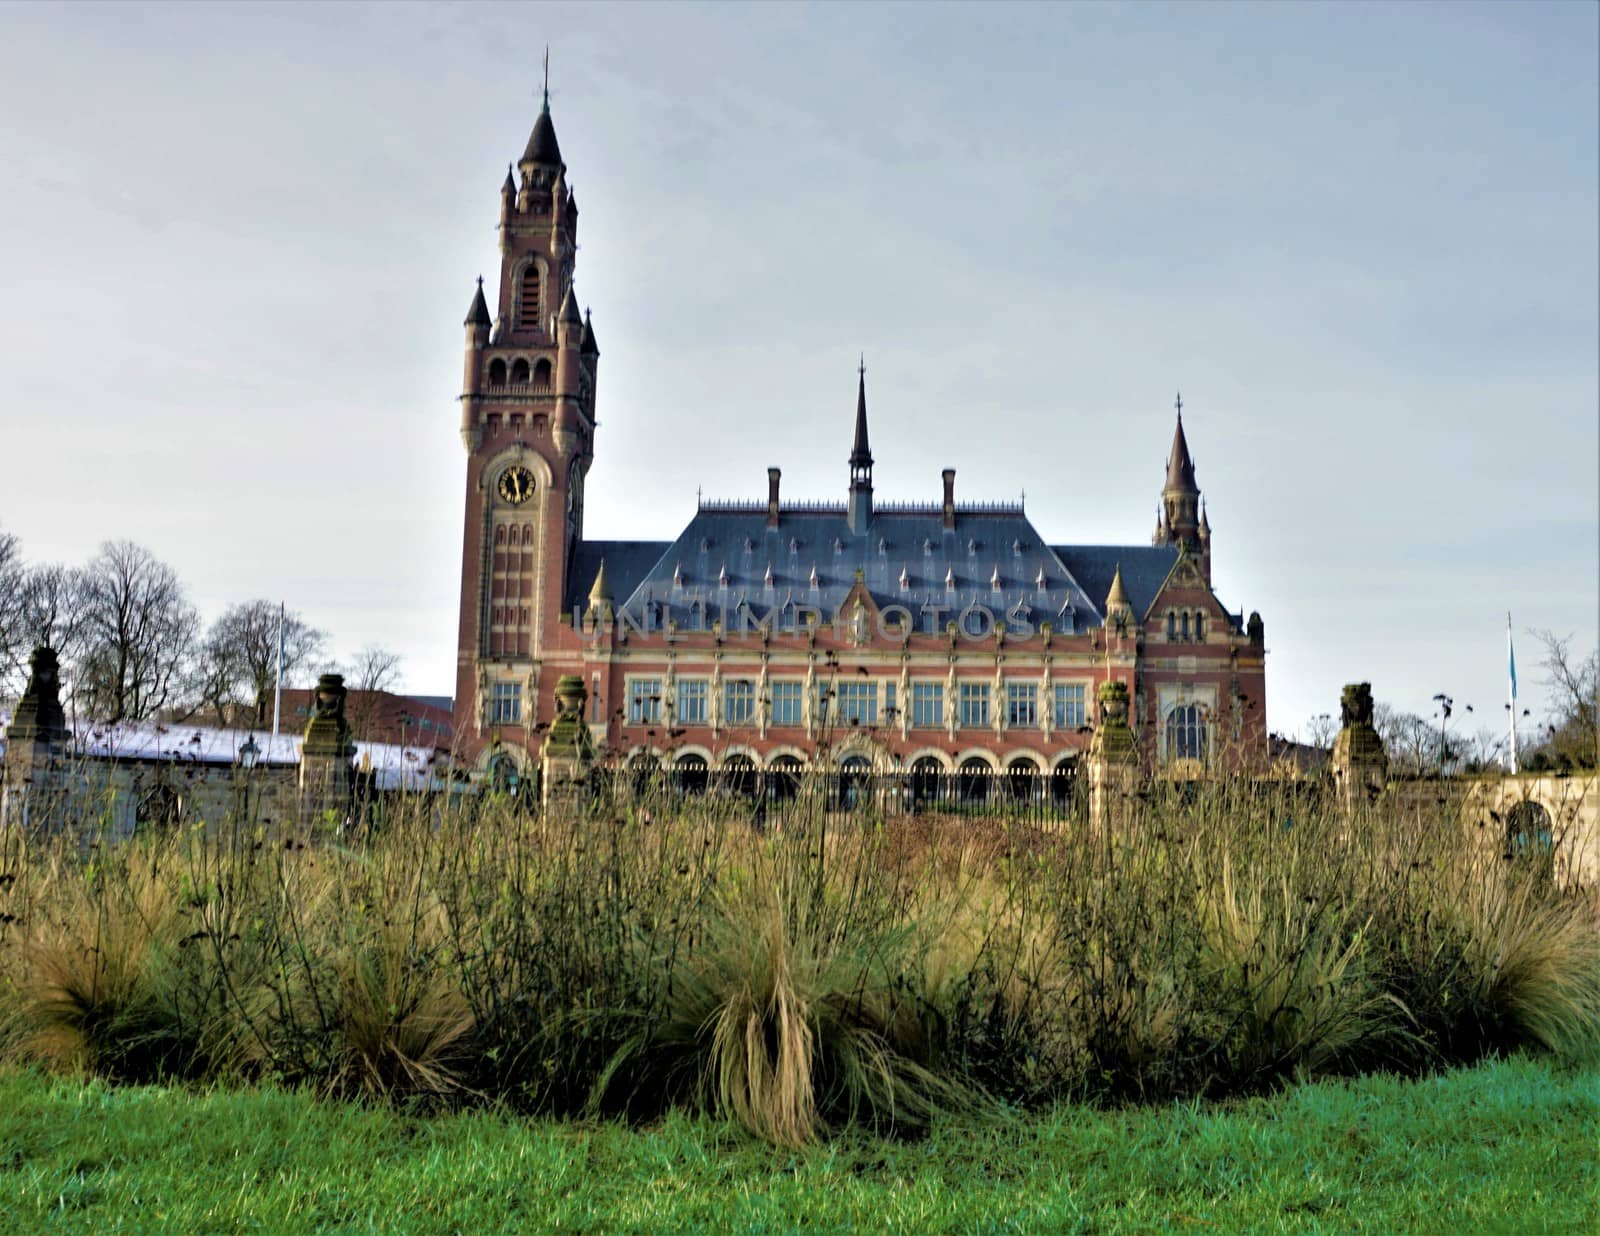 Peace palace in The Hague - the international court of justice